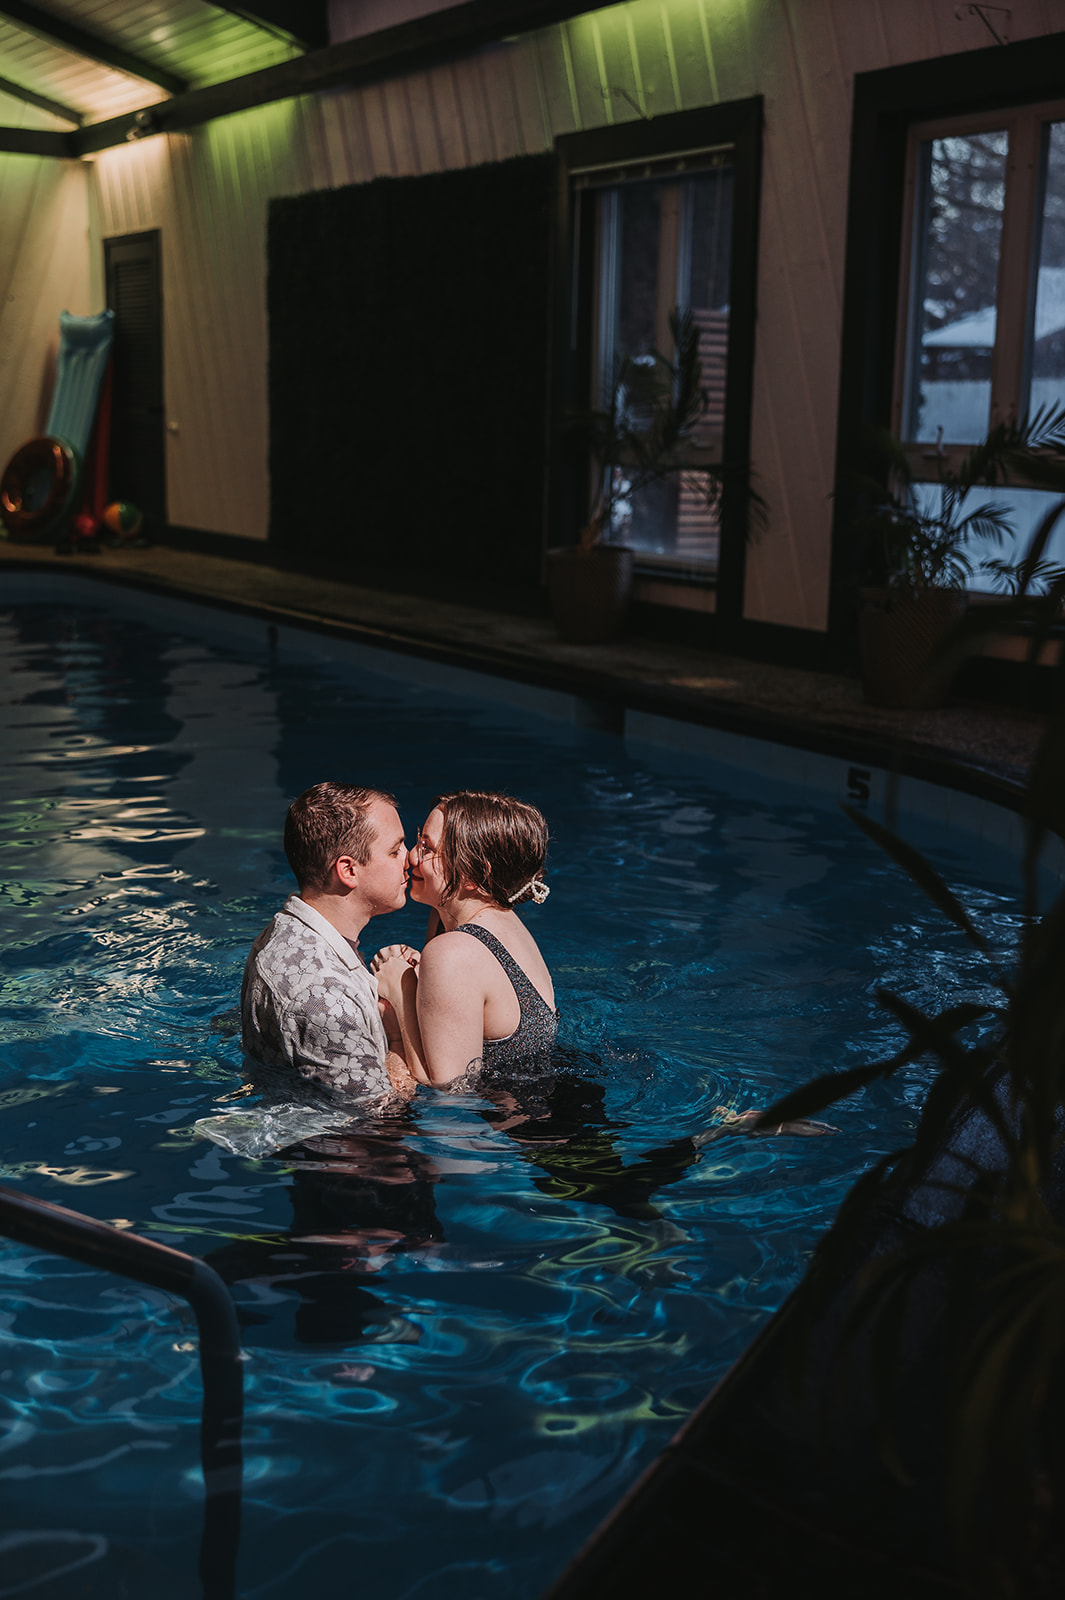 romantic nighttime couples photos at a pool in minneapolis